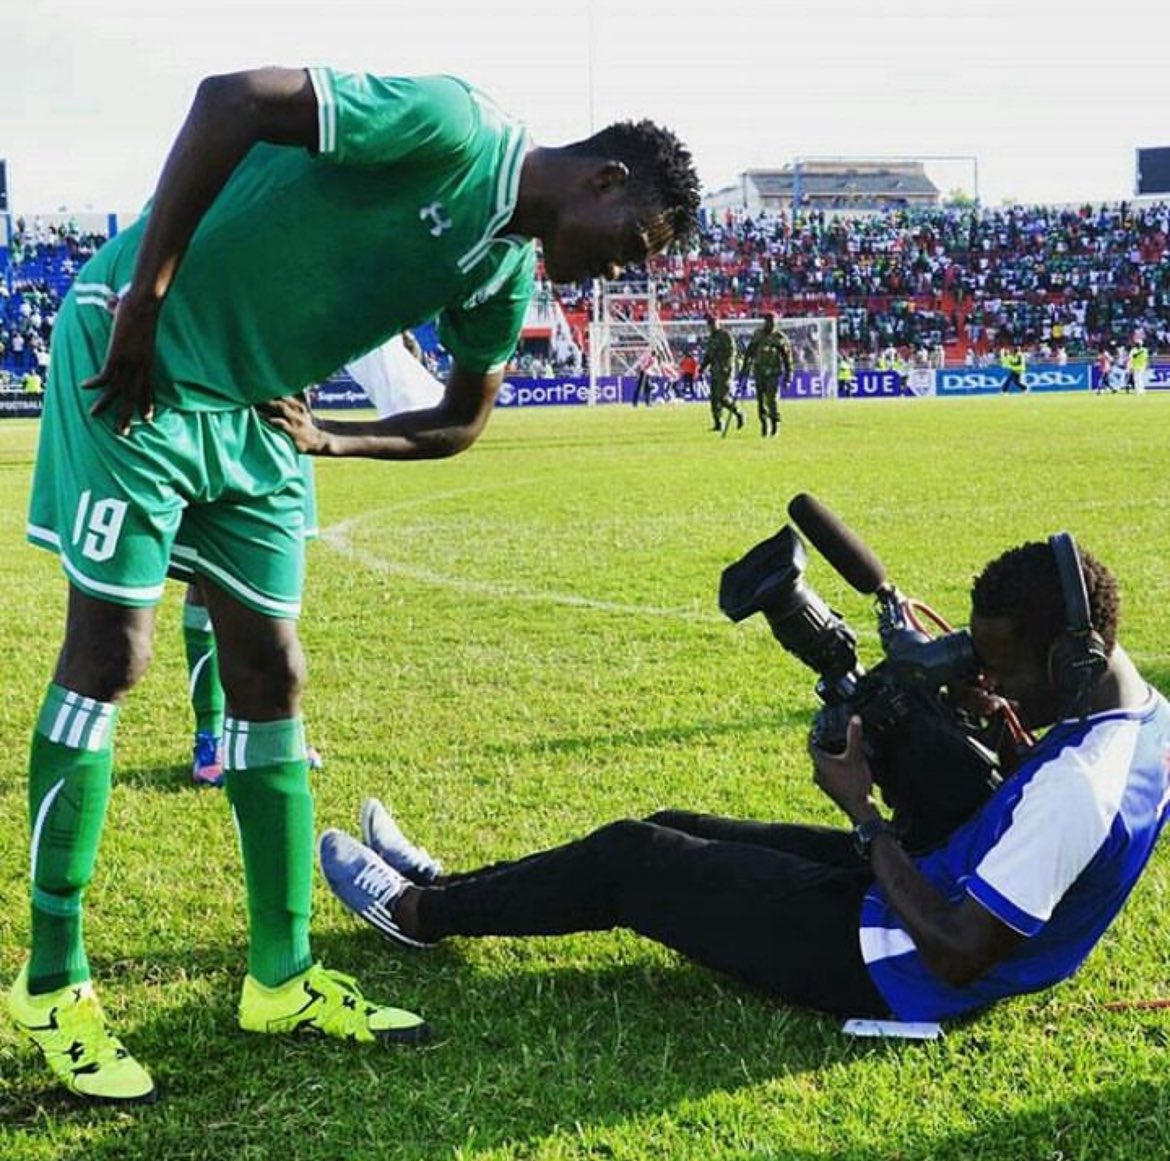 The last time I covered @OgadaOlunga was in 2015, he’d won the KPL title unbeaten with Gor Mahia. We would go separate ways in search of career growth until 9 yrs later today, when I covered him again. Looking back, God’s been great, we have all grown.